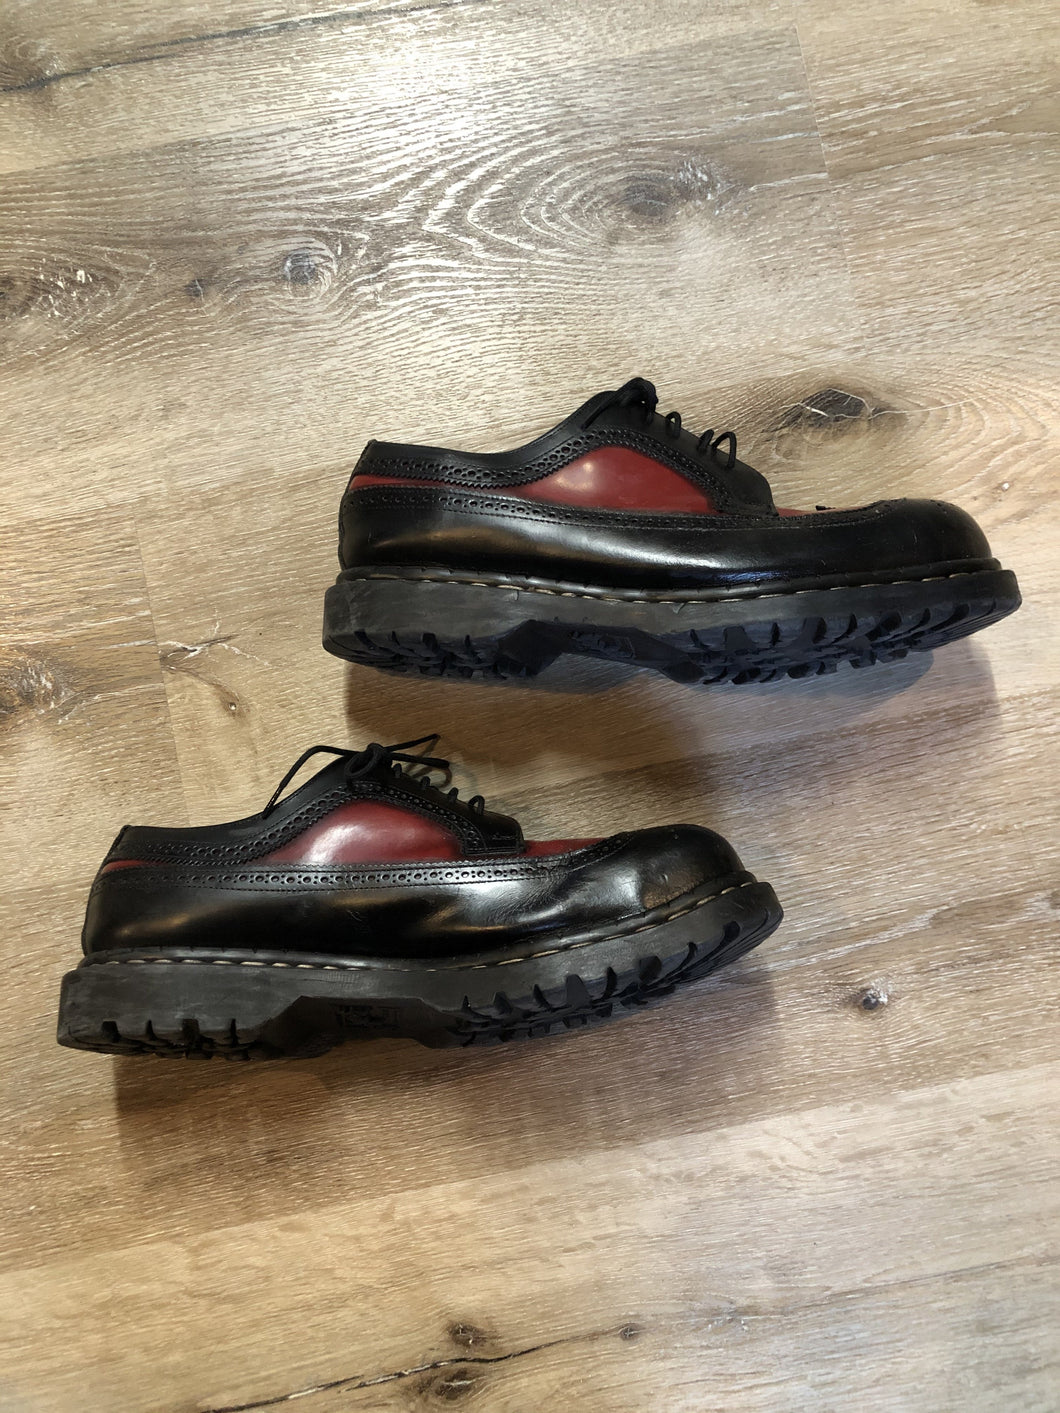 Doc Martens vintage black and red brogue style shoe with gripfast soles and steel toe.

Size 11.5 US Mens

*Shoes are in great condition.